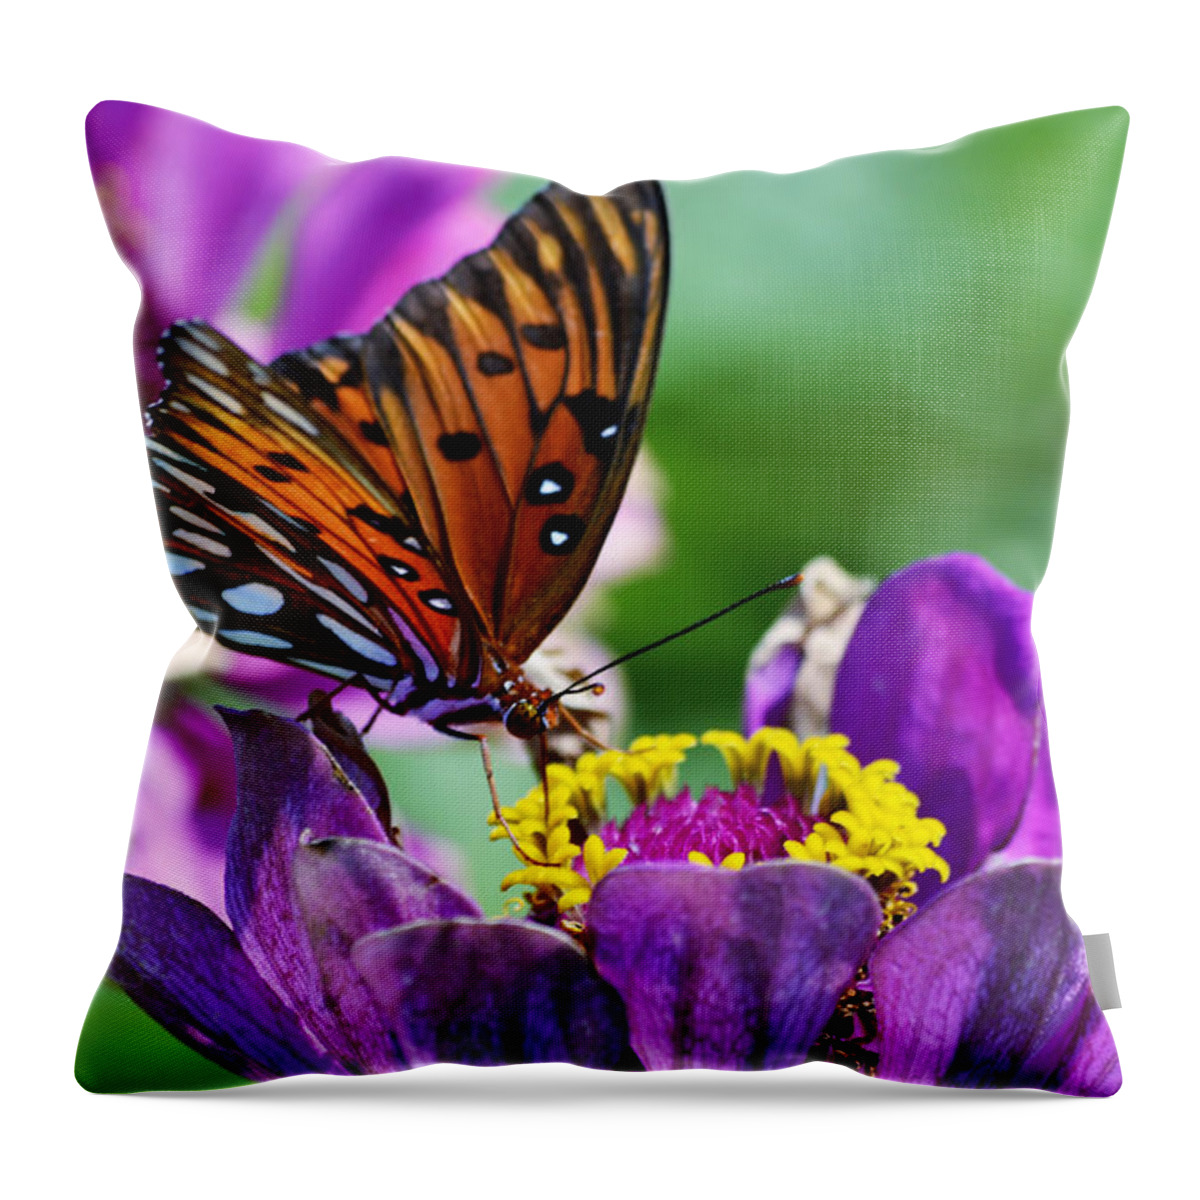 Naples Botanical Garden Throw Pillow featuring the photograph Afternoon Delight by Melanie Moraga